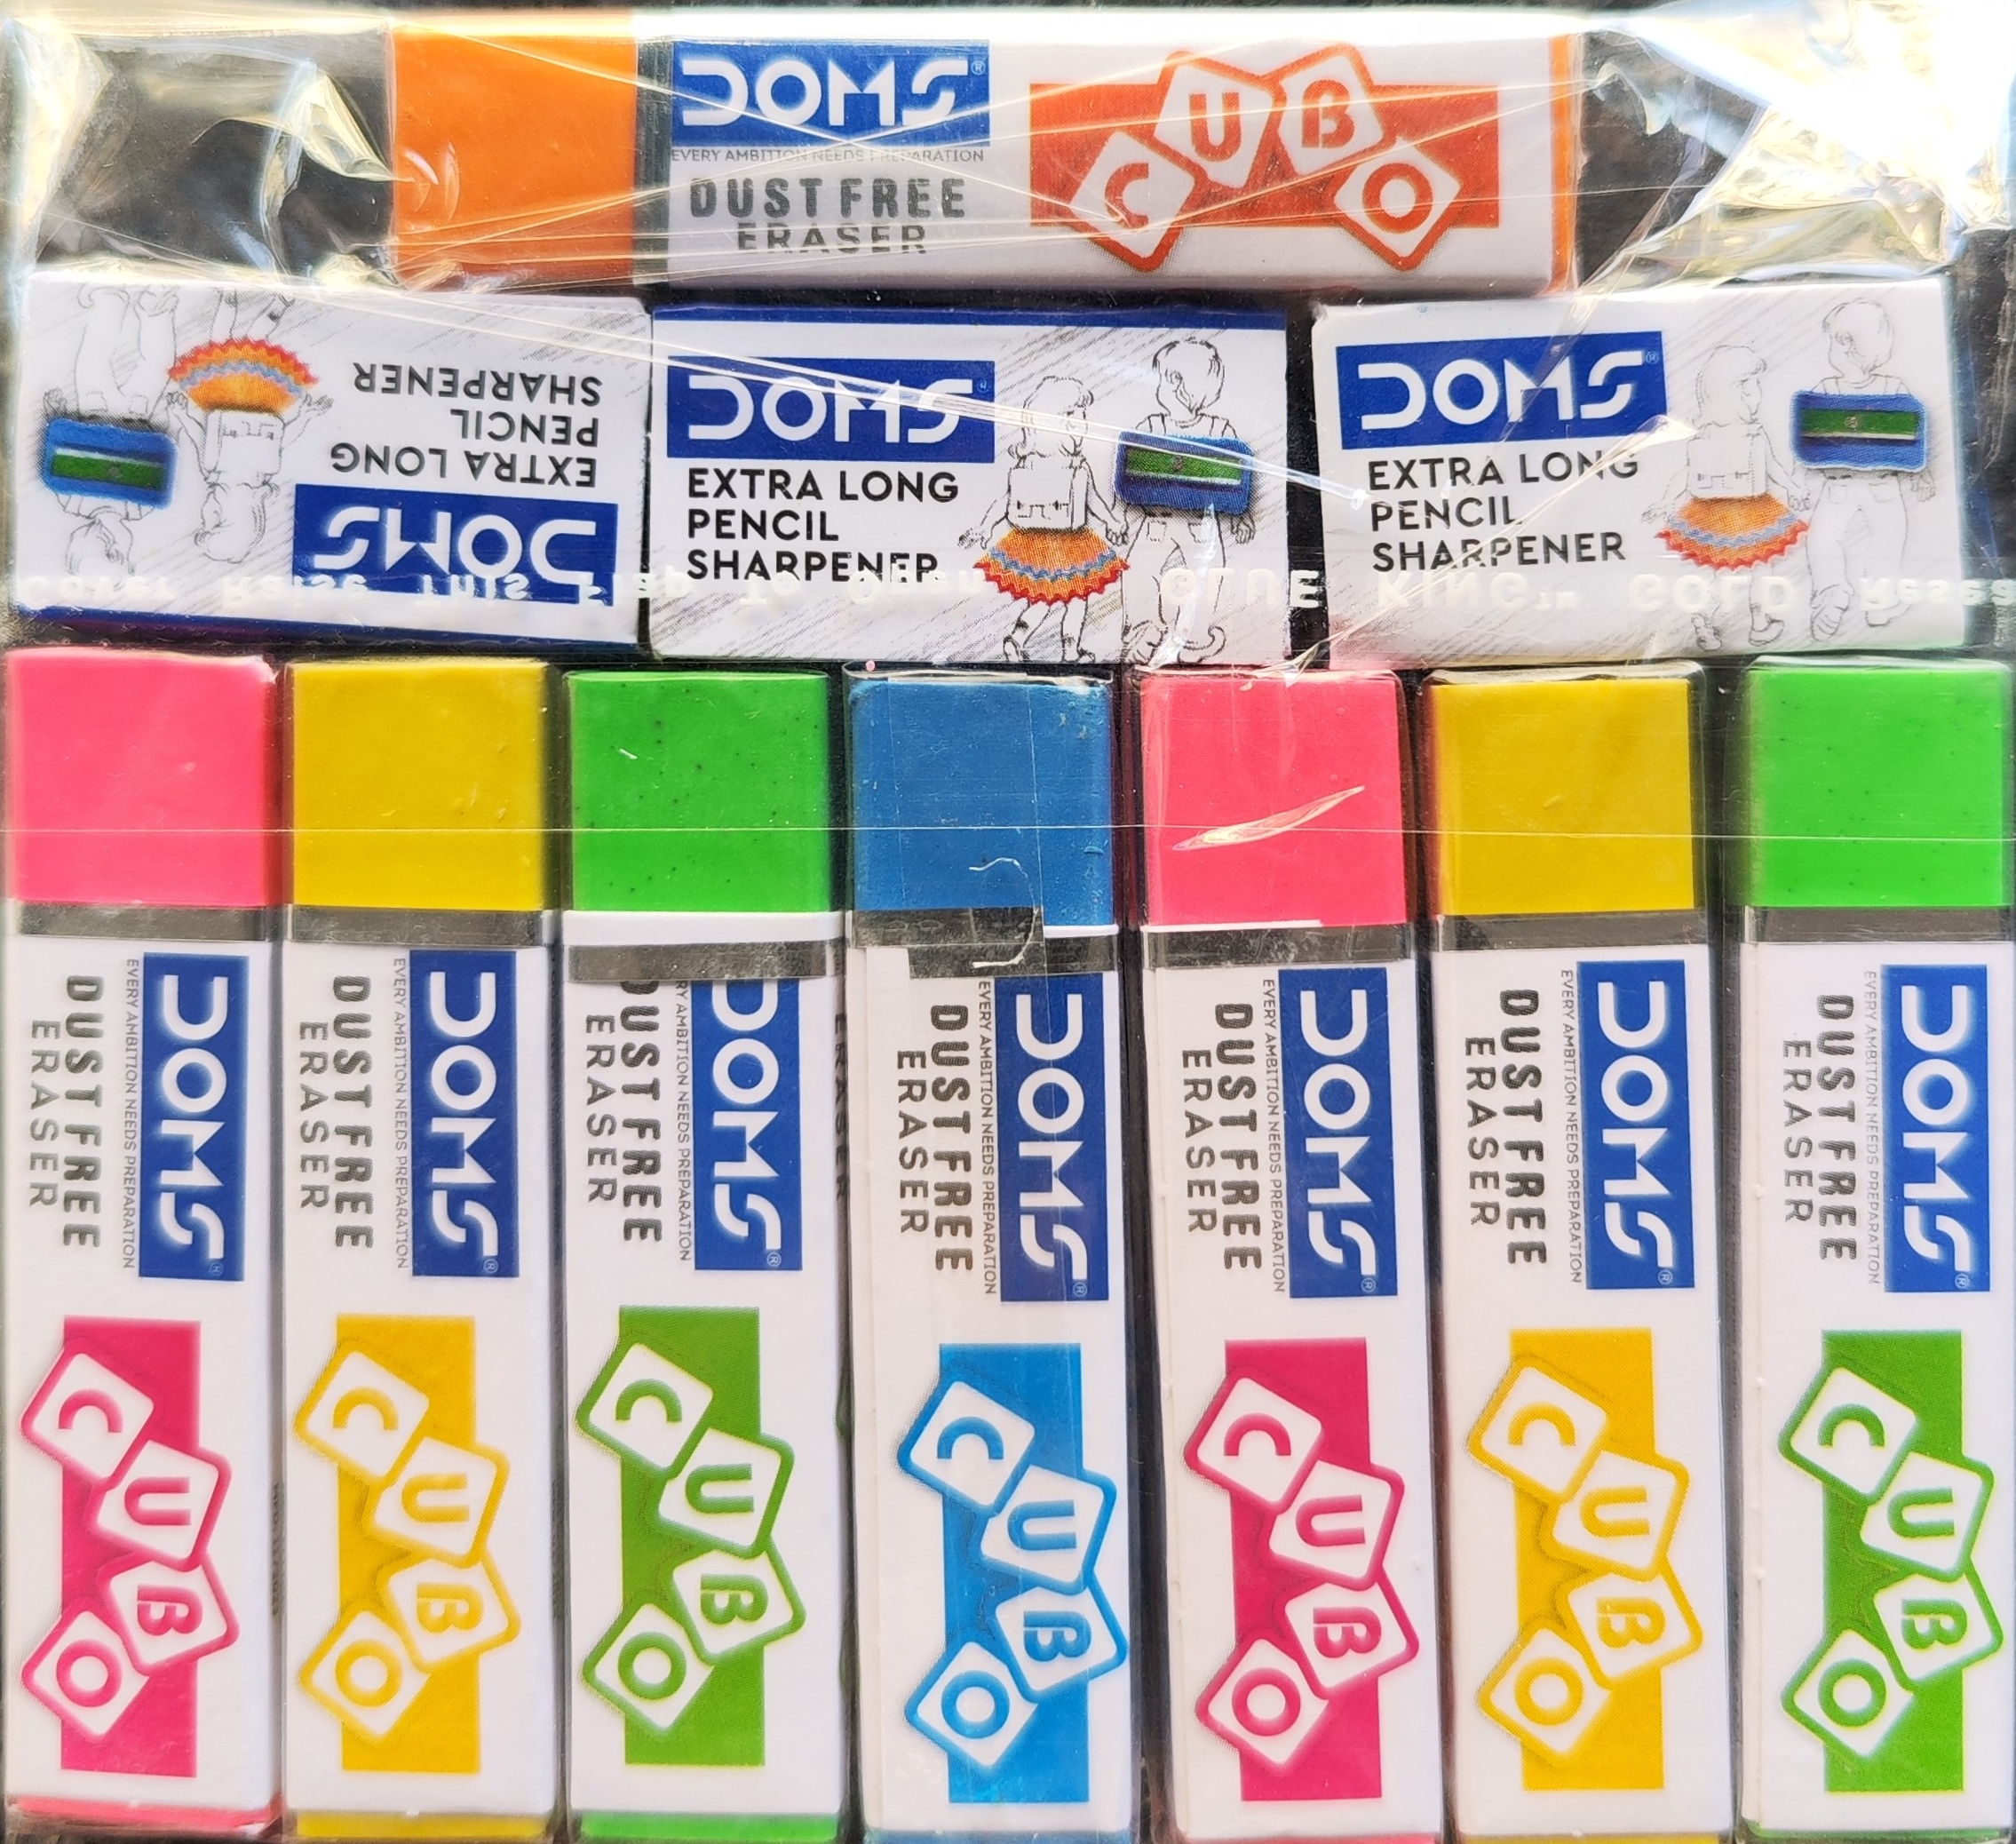 Doms Cubo Eraser and Long Point Sharpners